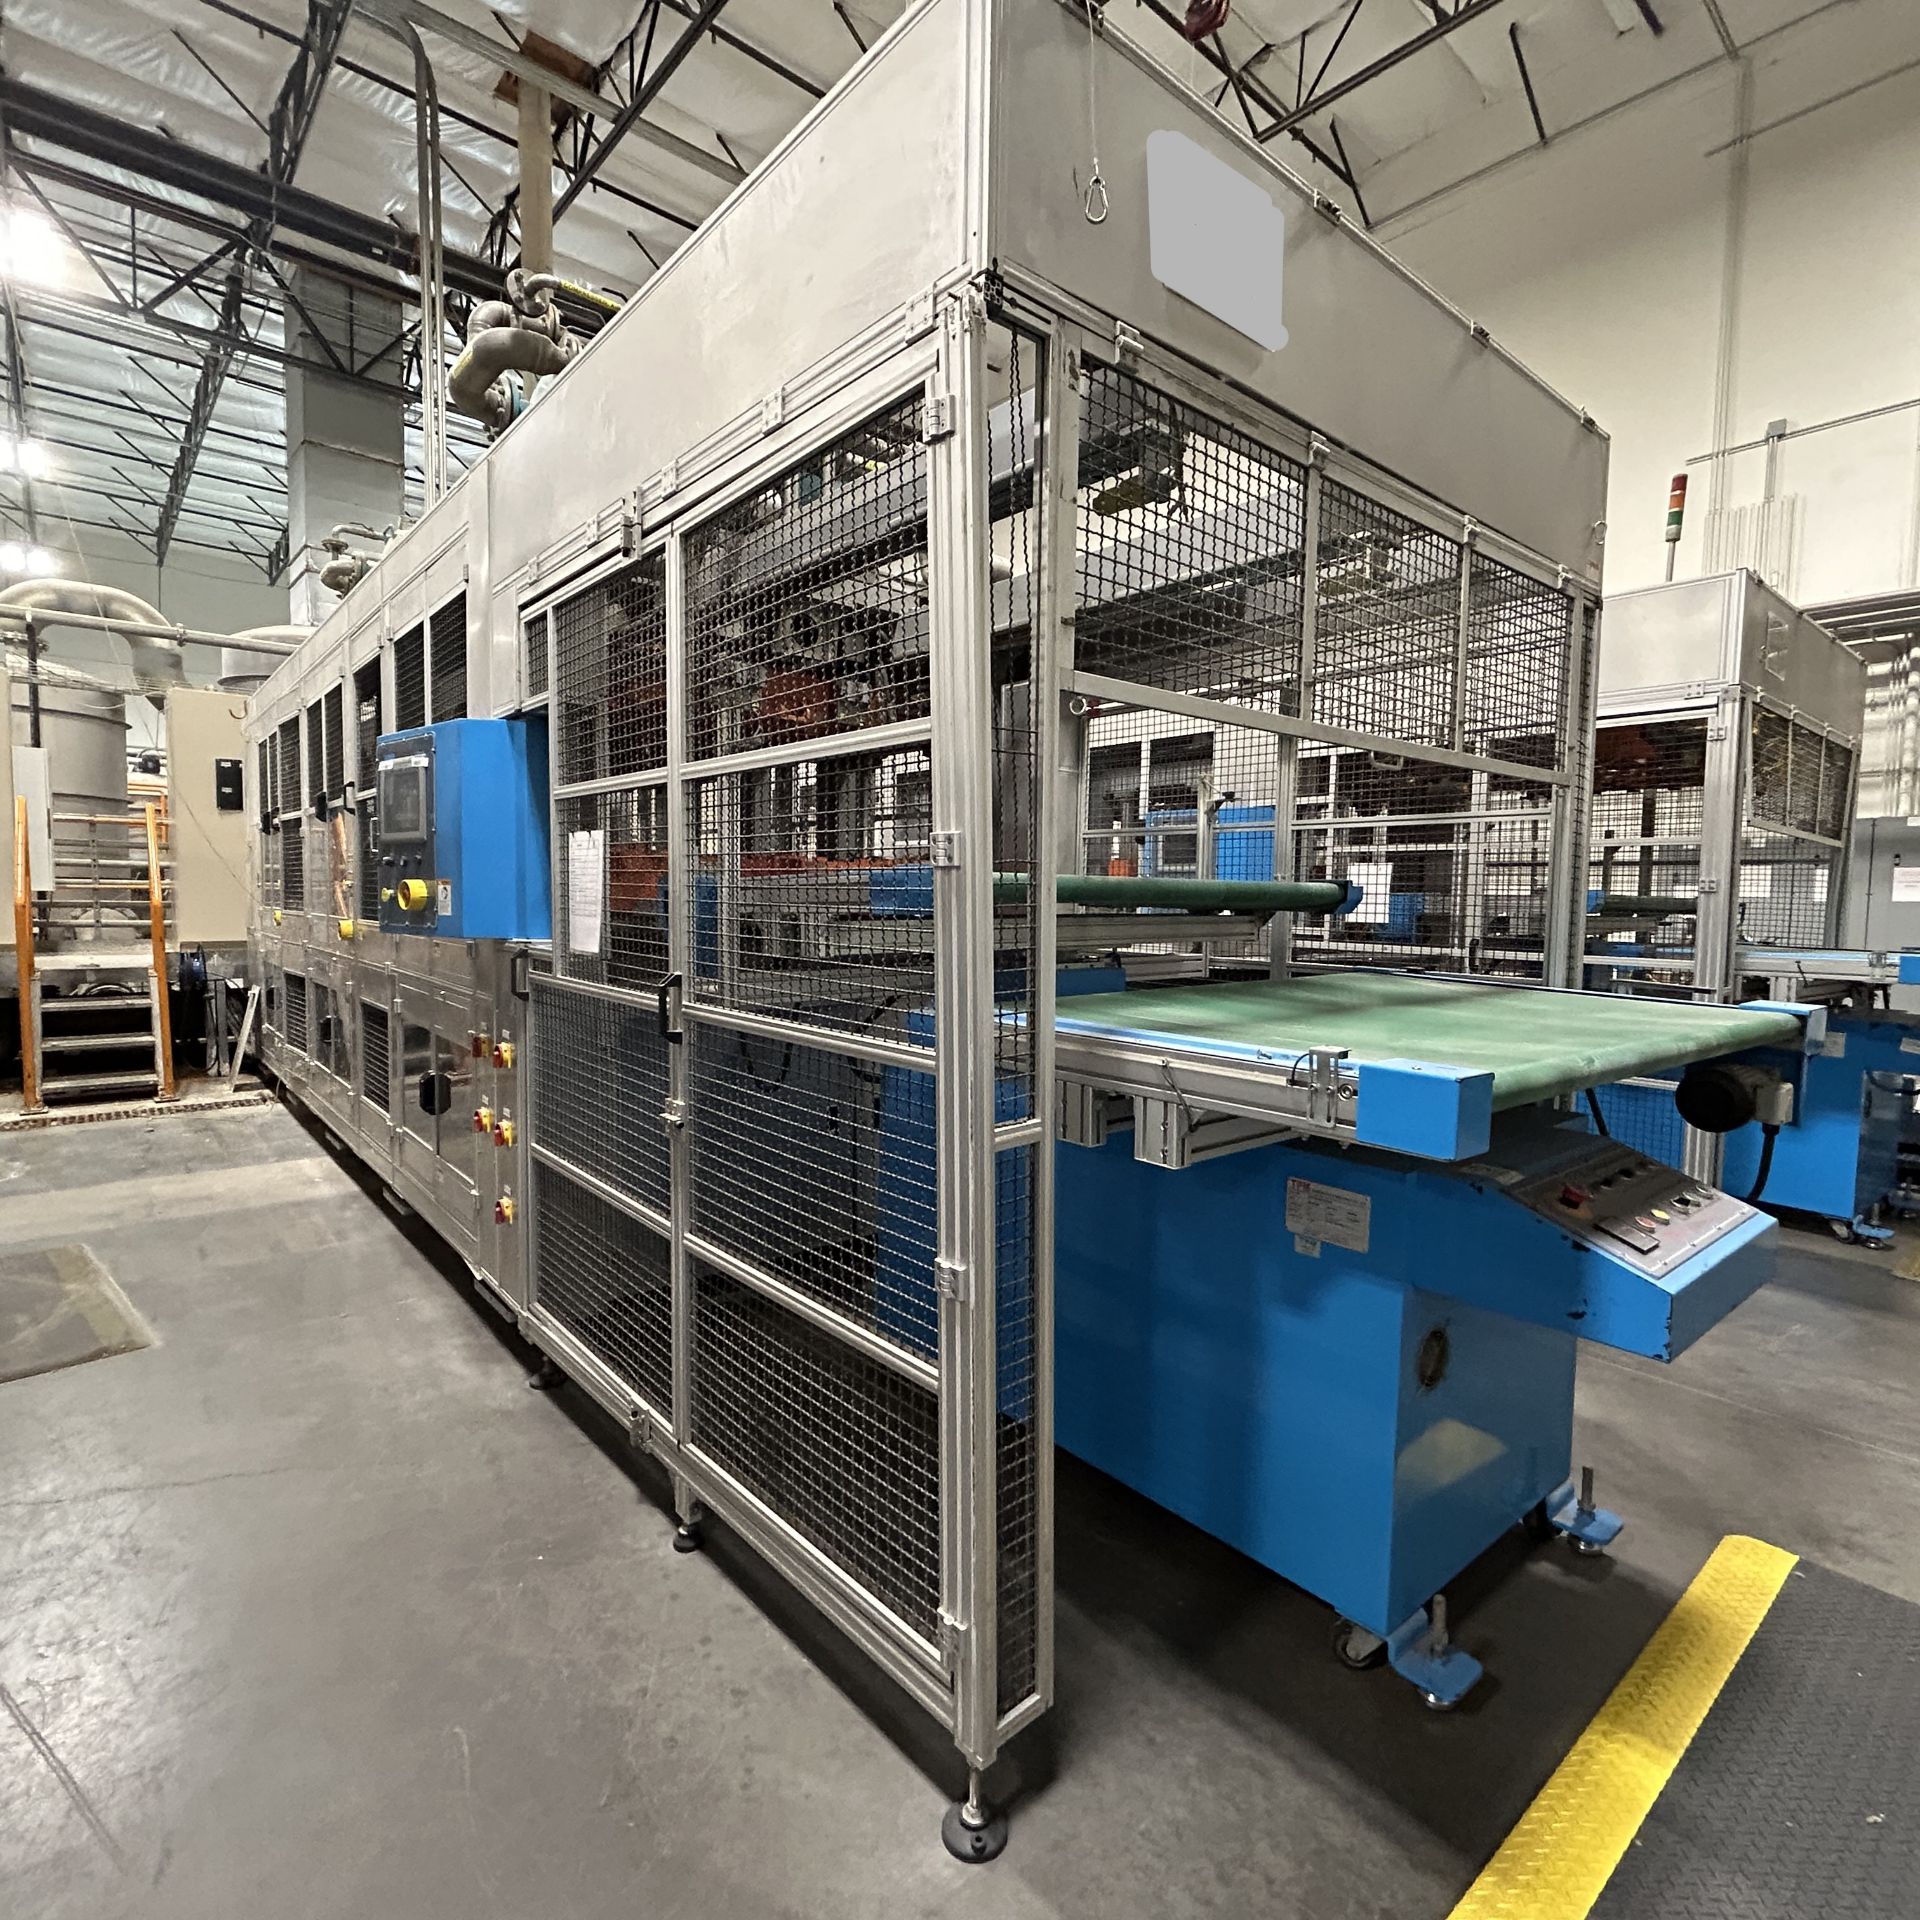 TPM-1500 3-Stage Pulp Thermoforming Machine Equipped With (1) 2018 TPM-AS-1500 2-Stage Auto Stacker